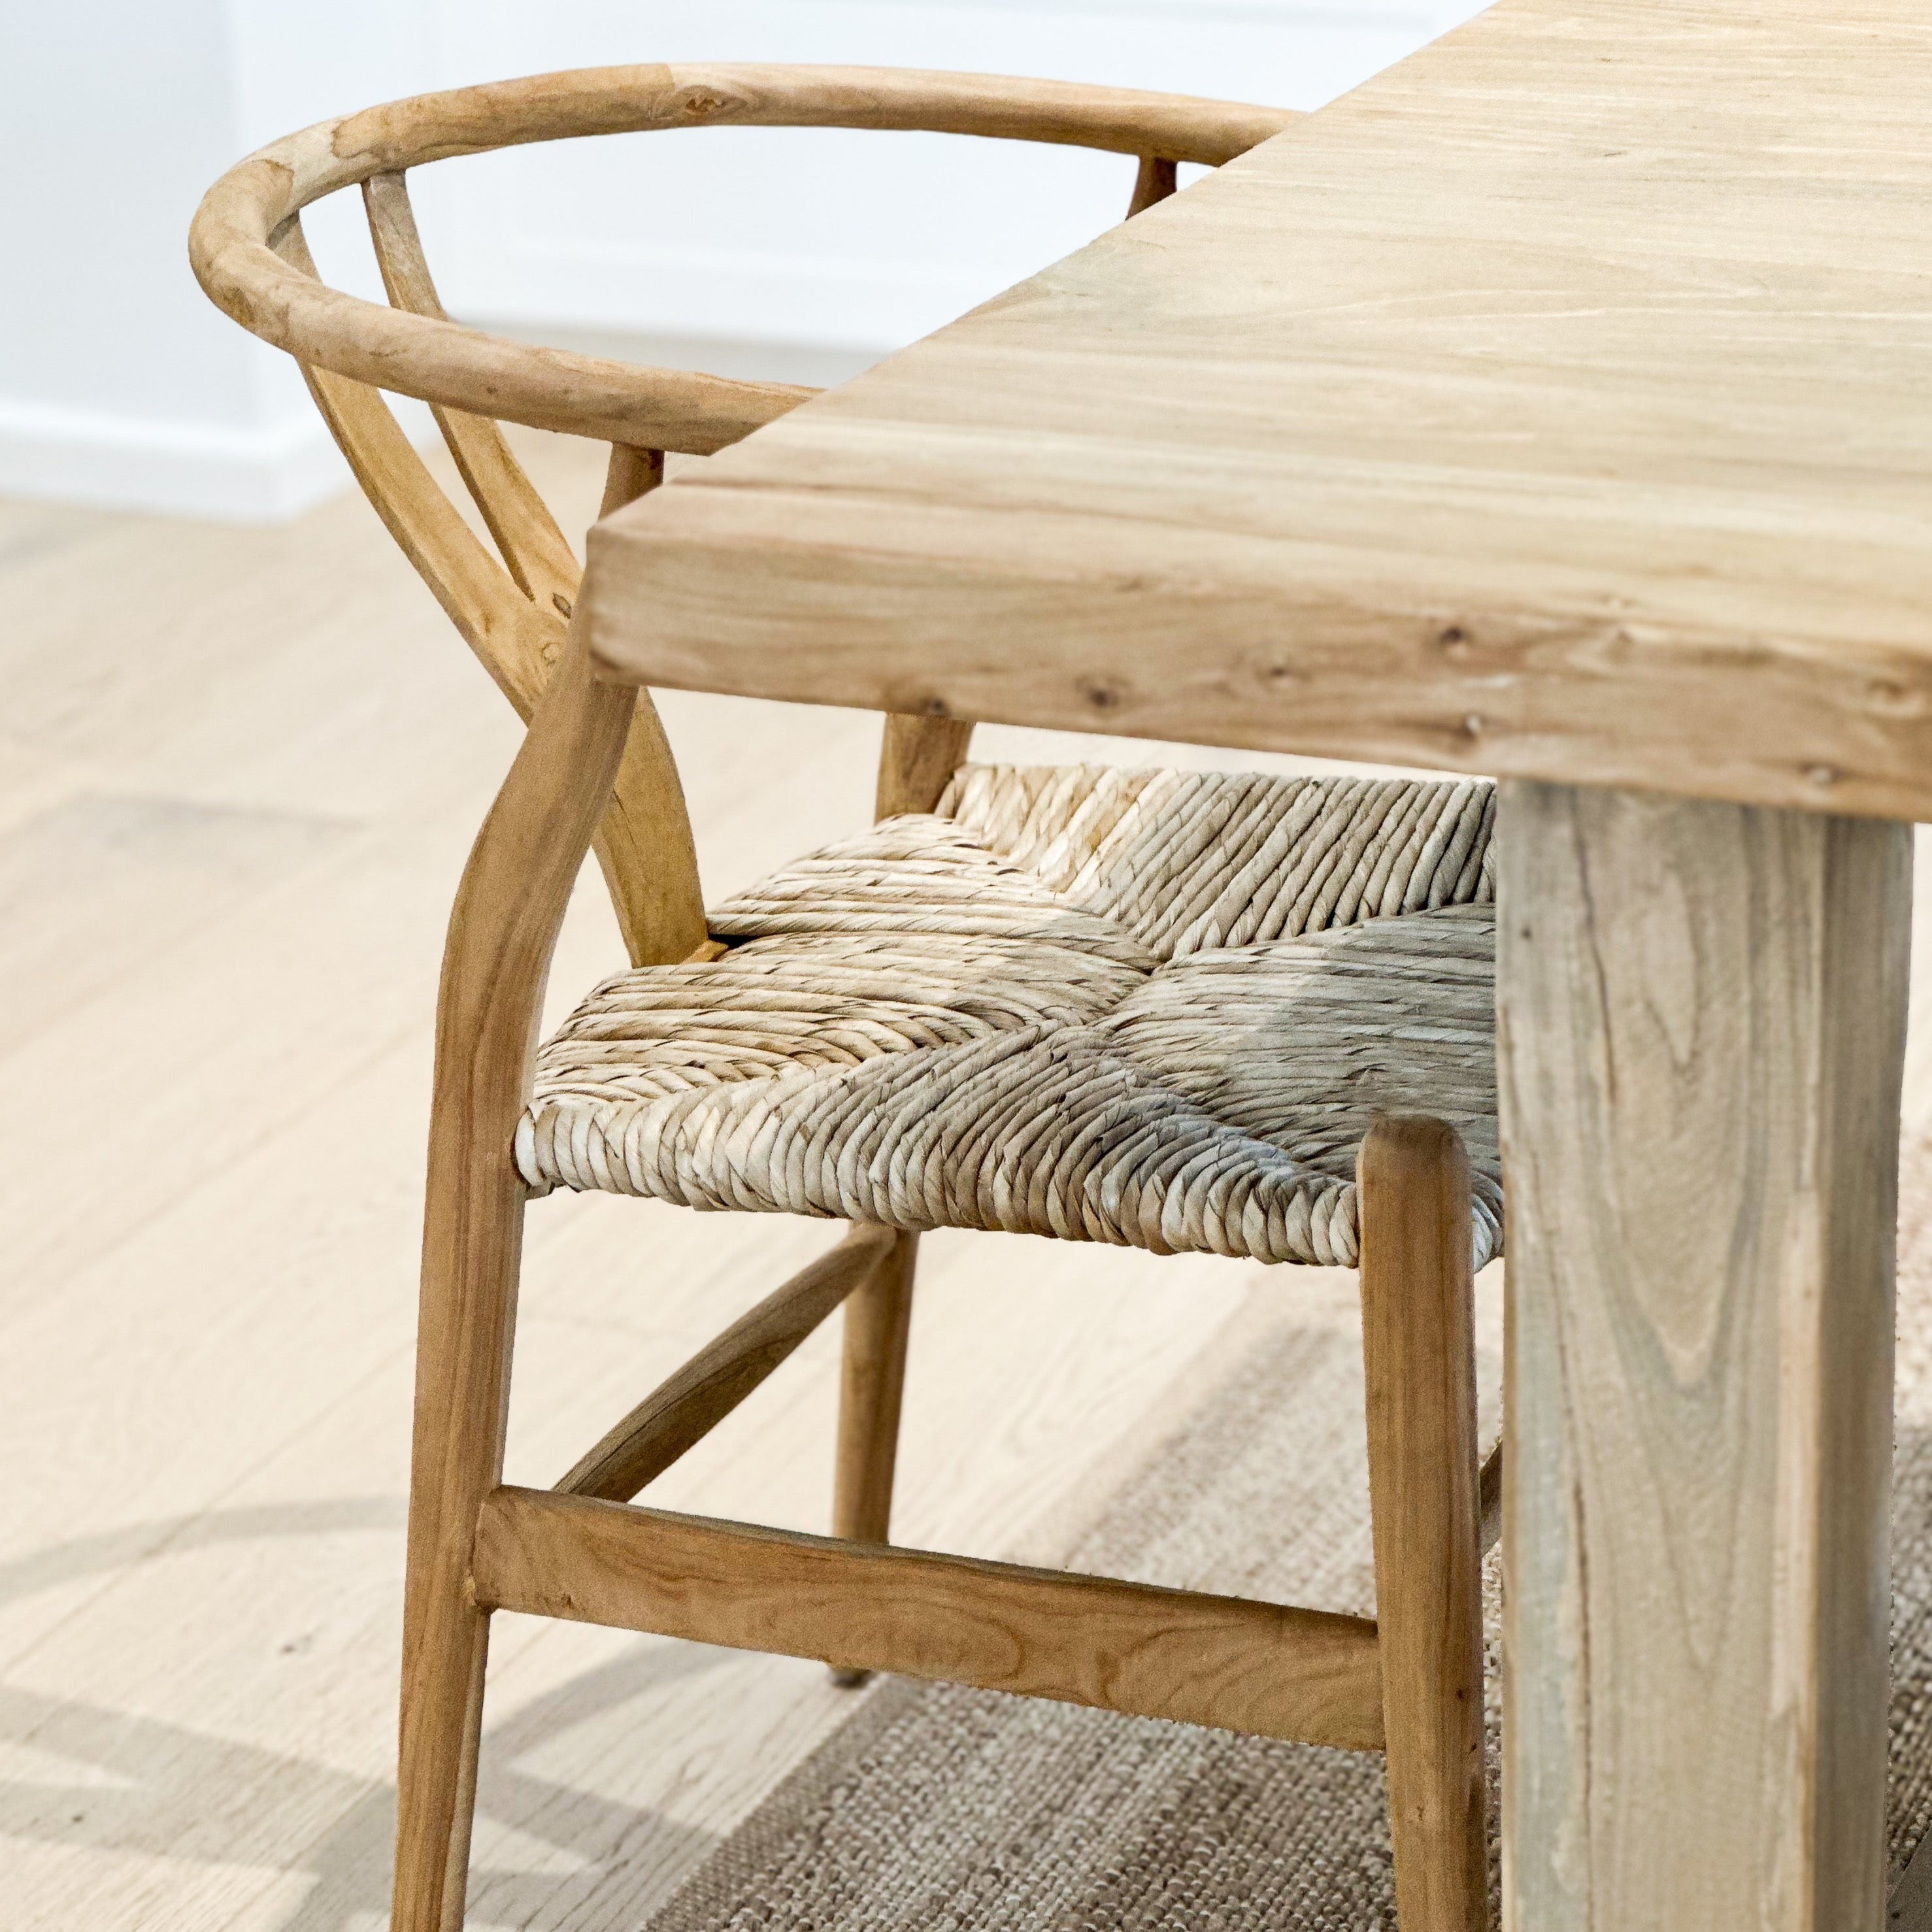 Marley Dining Chair